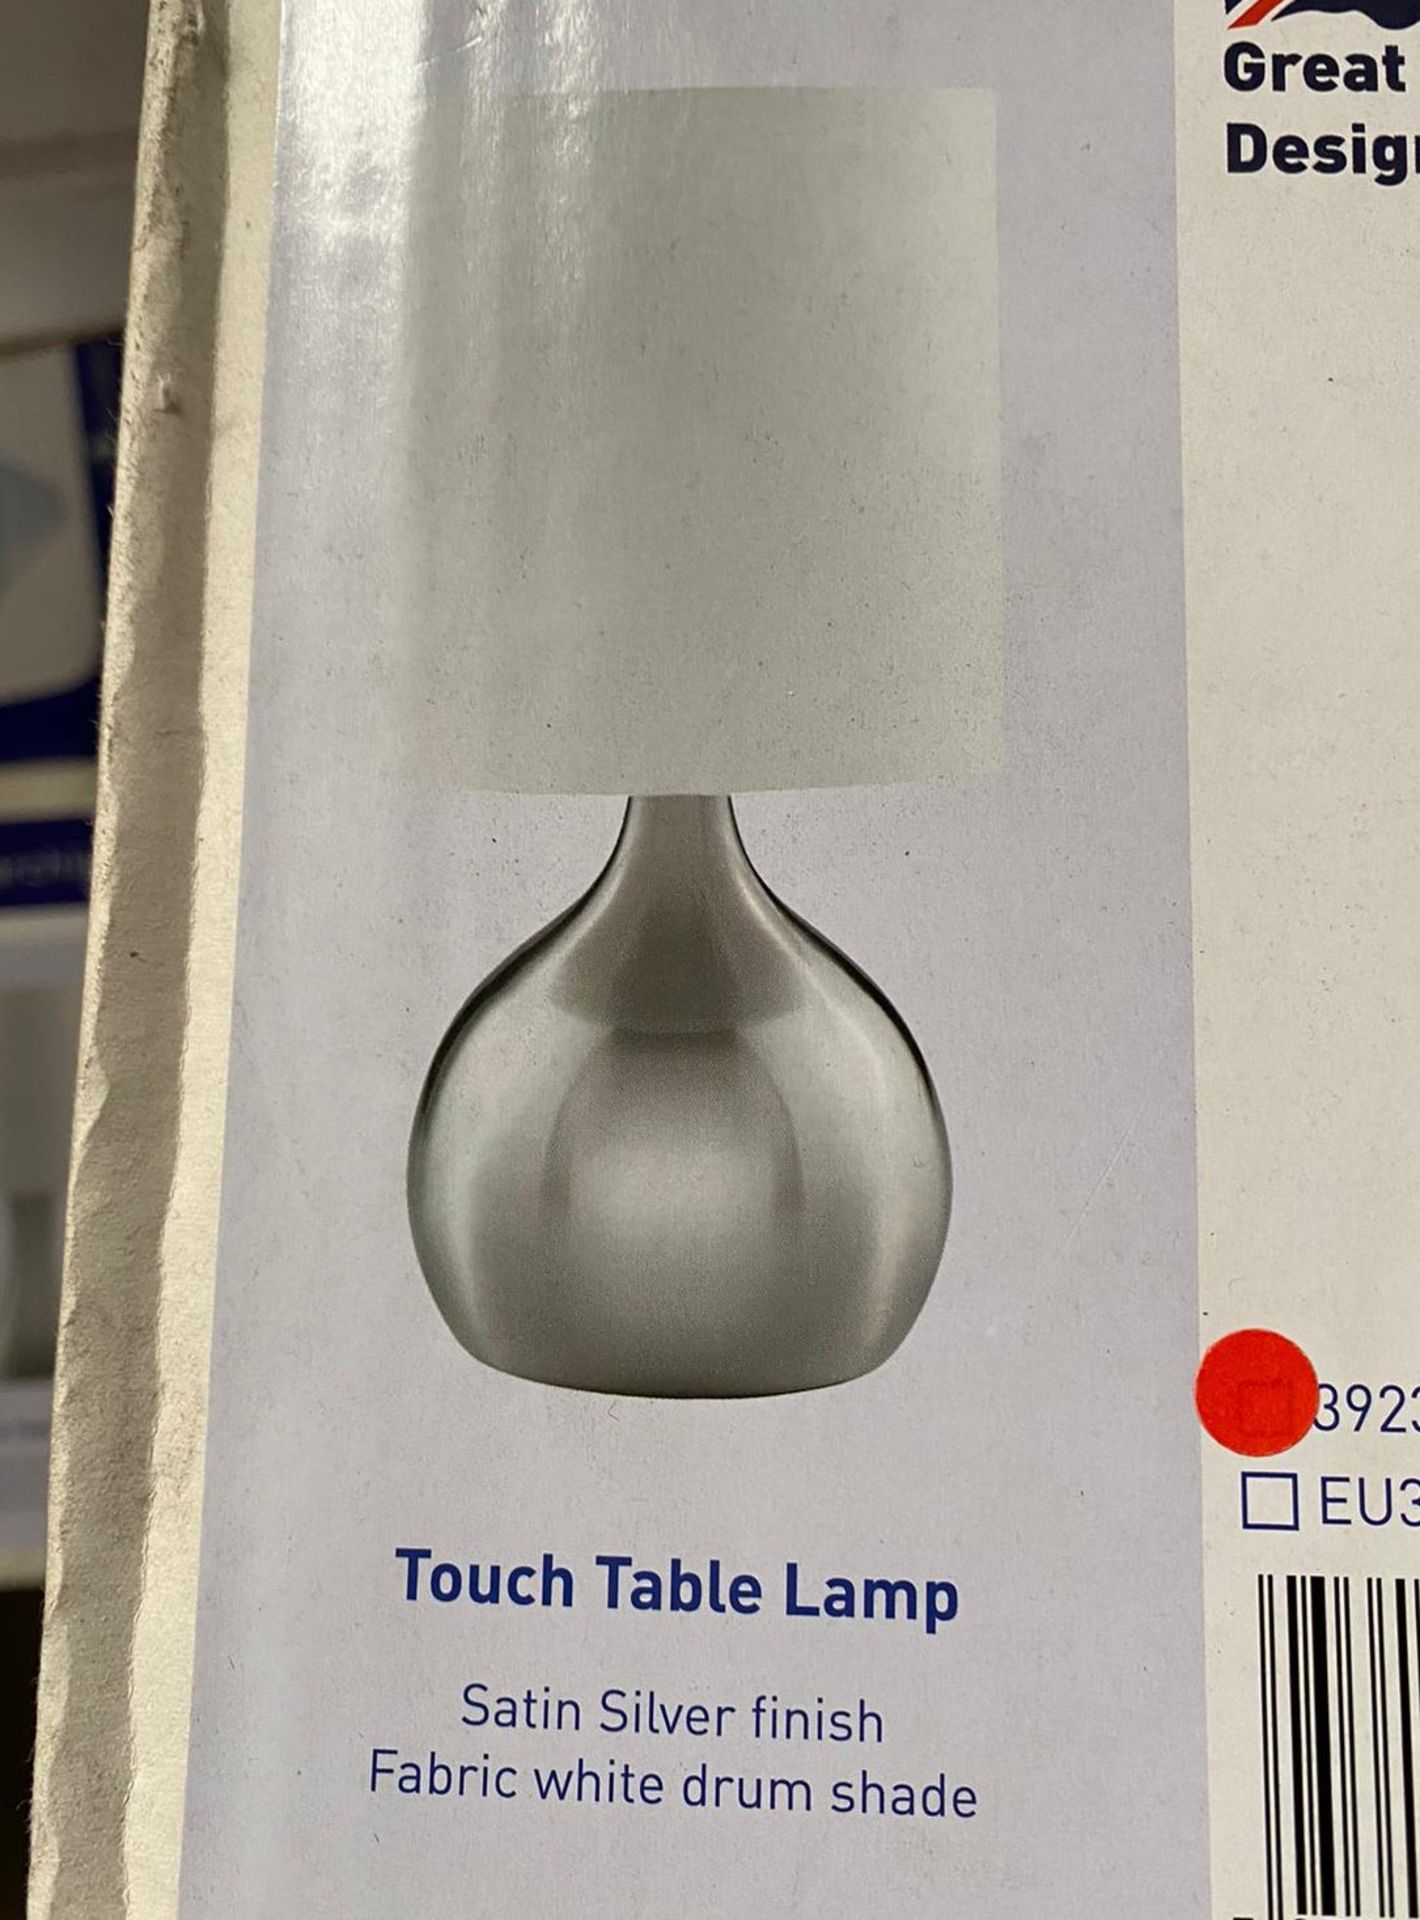 1 x Searchlight Touch Table Lamp in satin silver - Ref: 3923SS - New and Boxed Stock - Image 2 of 4